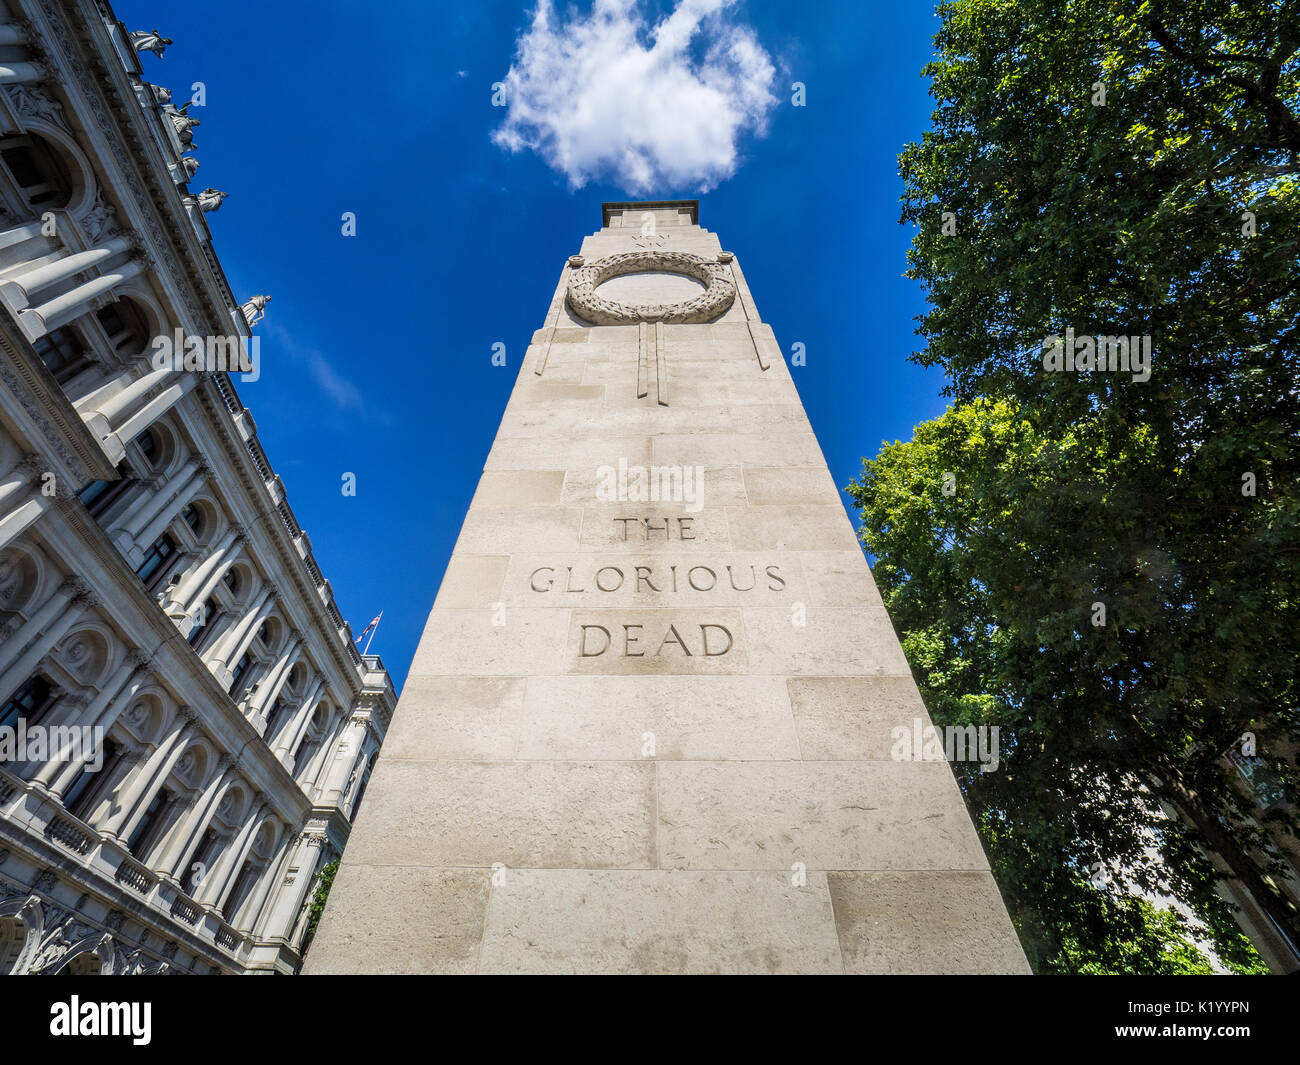 The Cenotaph Whitehall, central London - designed by Edward Lutyens & completed 1920, it is the centrepiece of the UK's annual Remembrance Service. Stock Photo